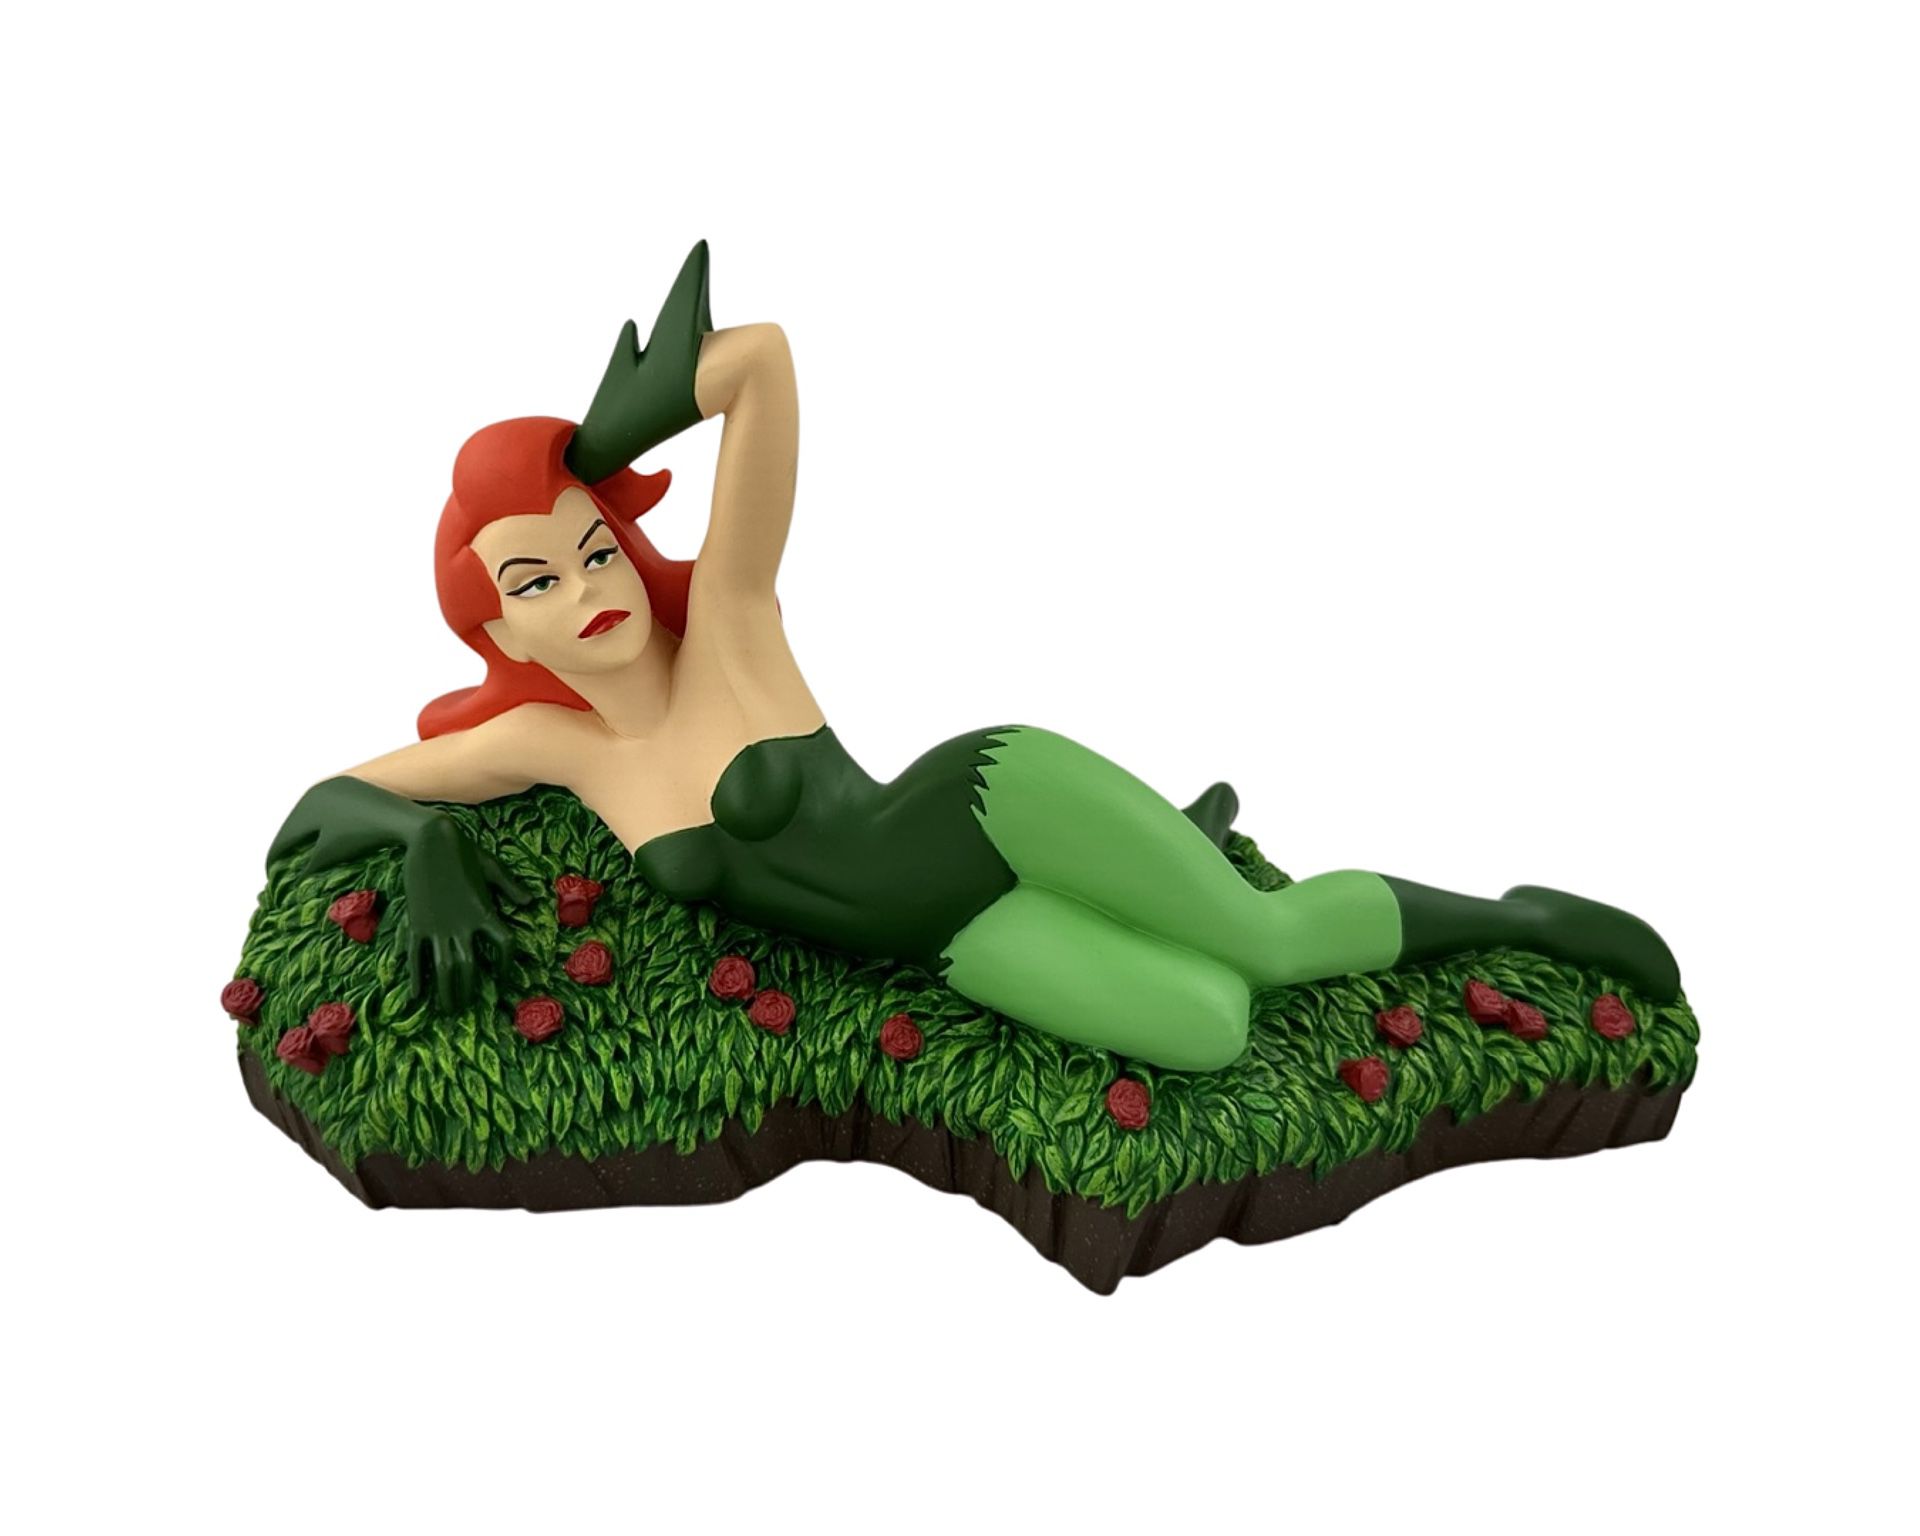 Rare New DC Comics Poison Ivy Statue #0034/2100 Limited Edition Batman The Animated Series New 